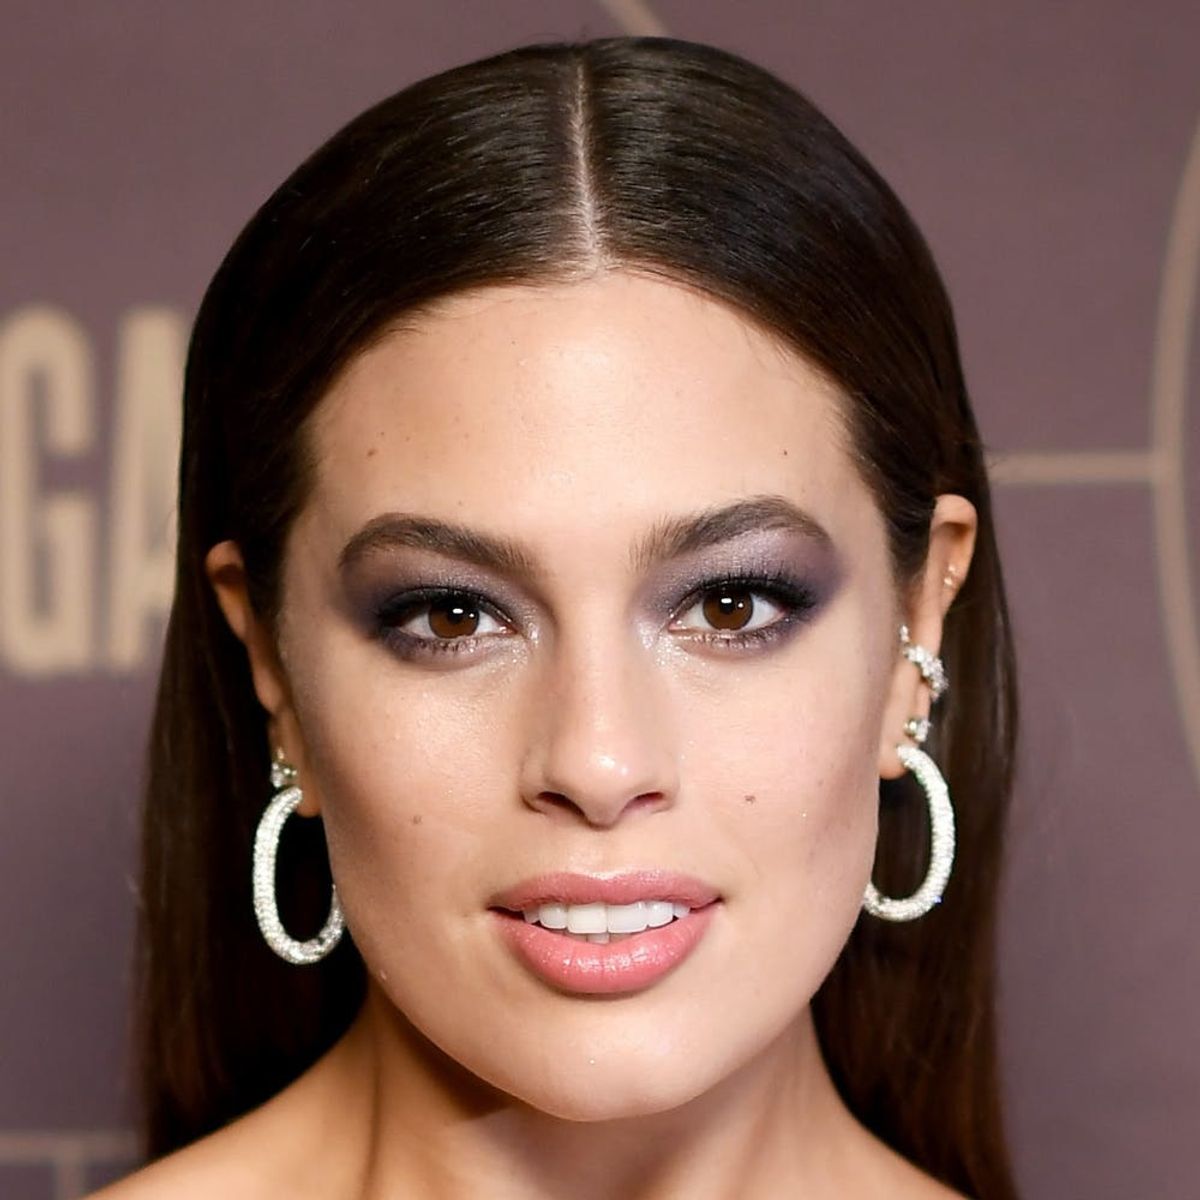 Ashley Graham Says a Talk Show Is “in the Works”